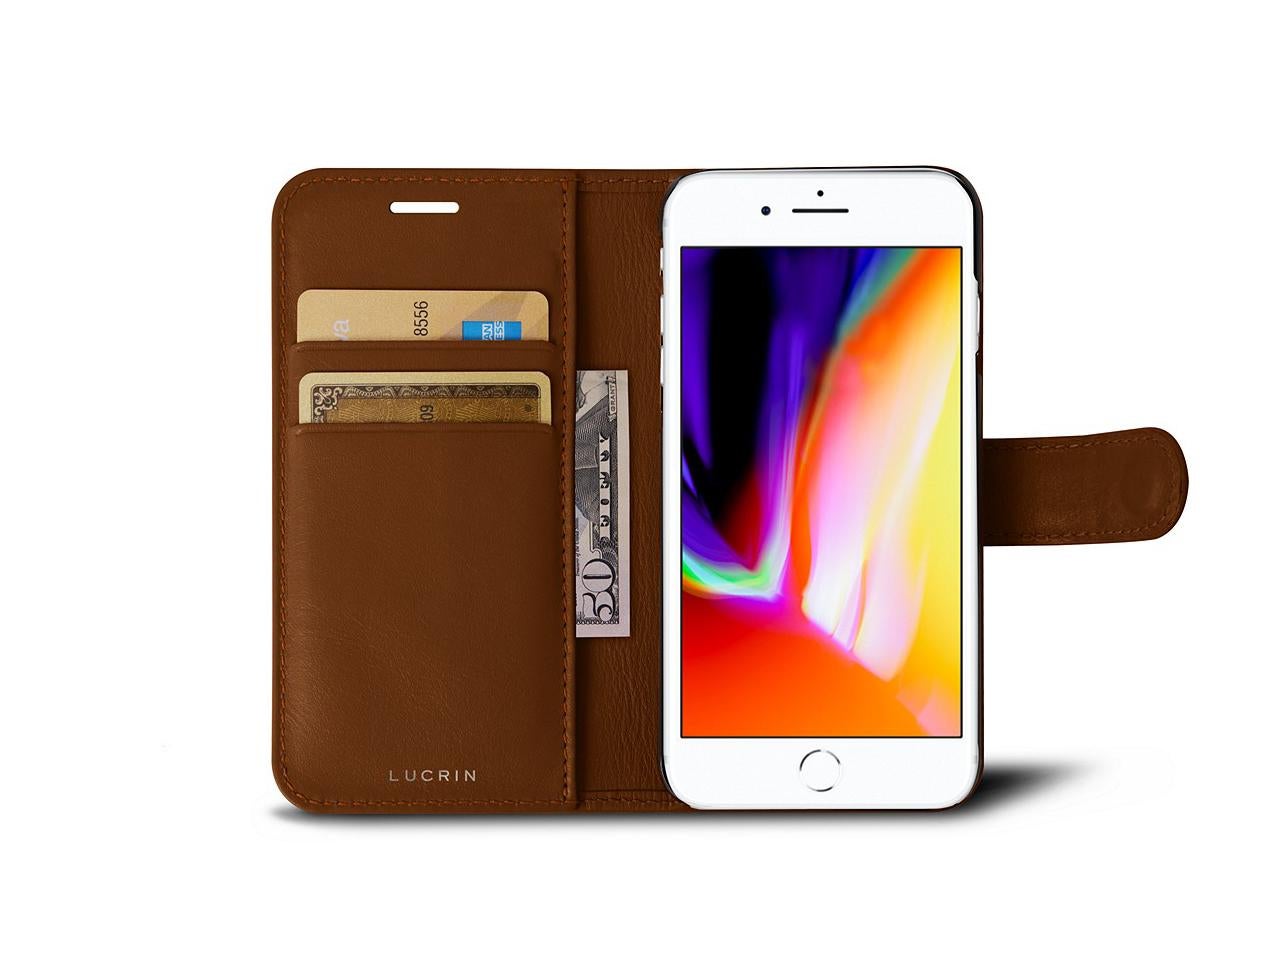 Flip Cover fit for iPhone 8 Plus business gifts with waterproof-case bags Leather Case for iPhone 8 Plus 